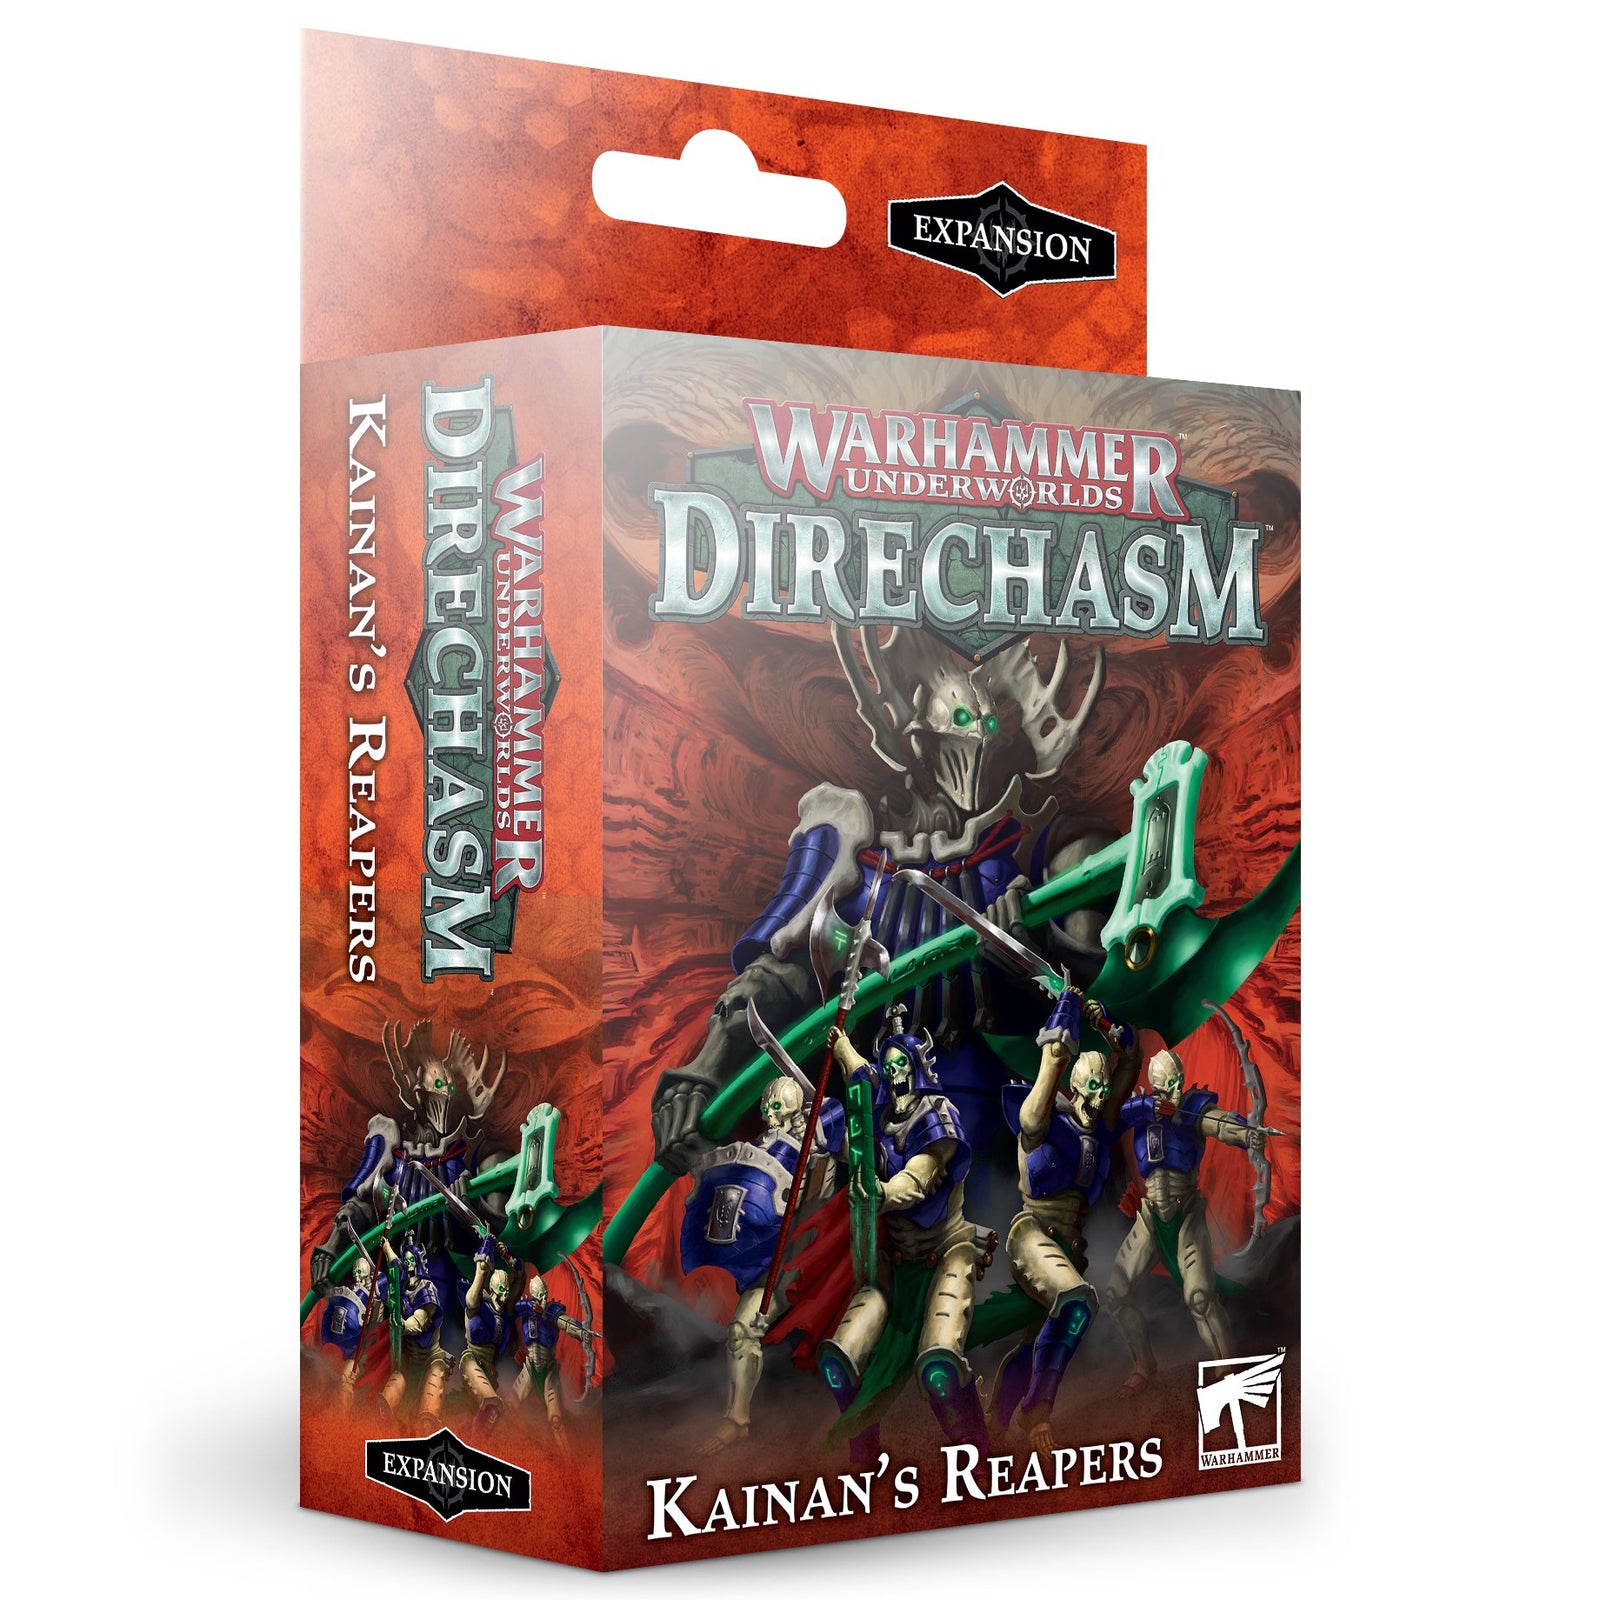 box image for Kainan's Reapers